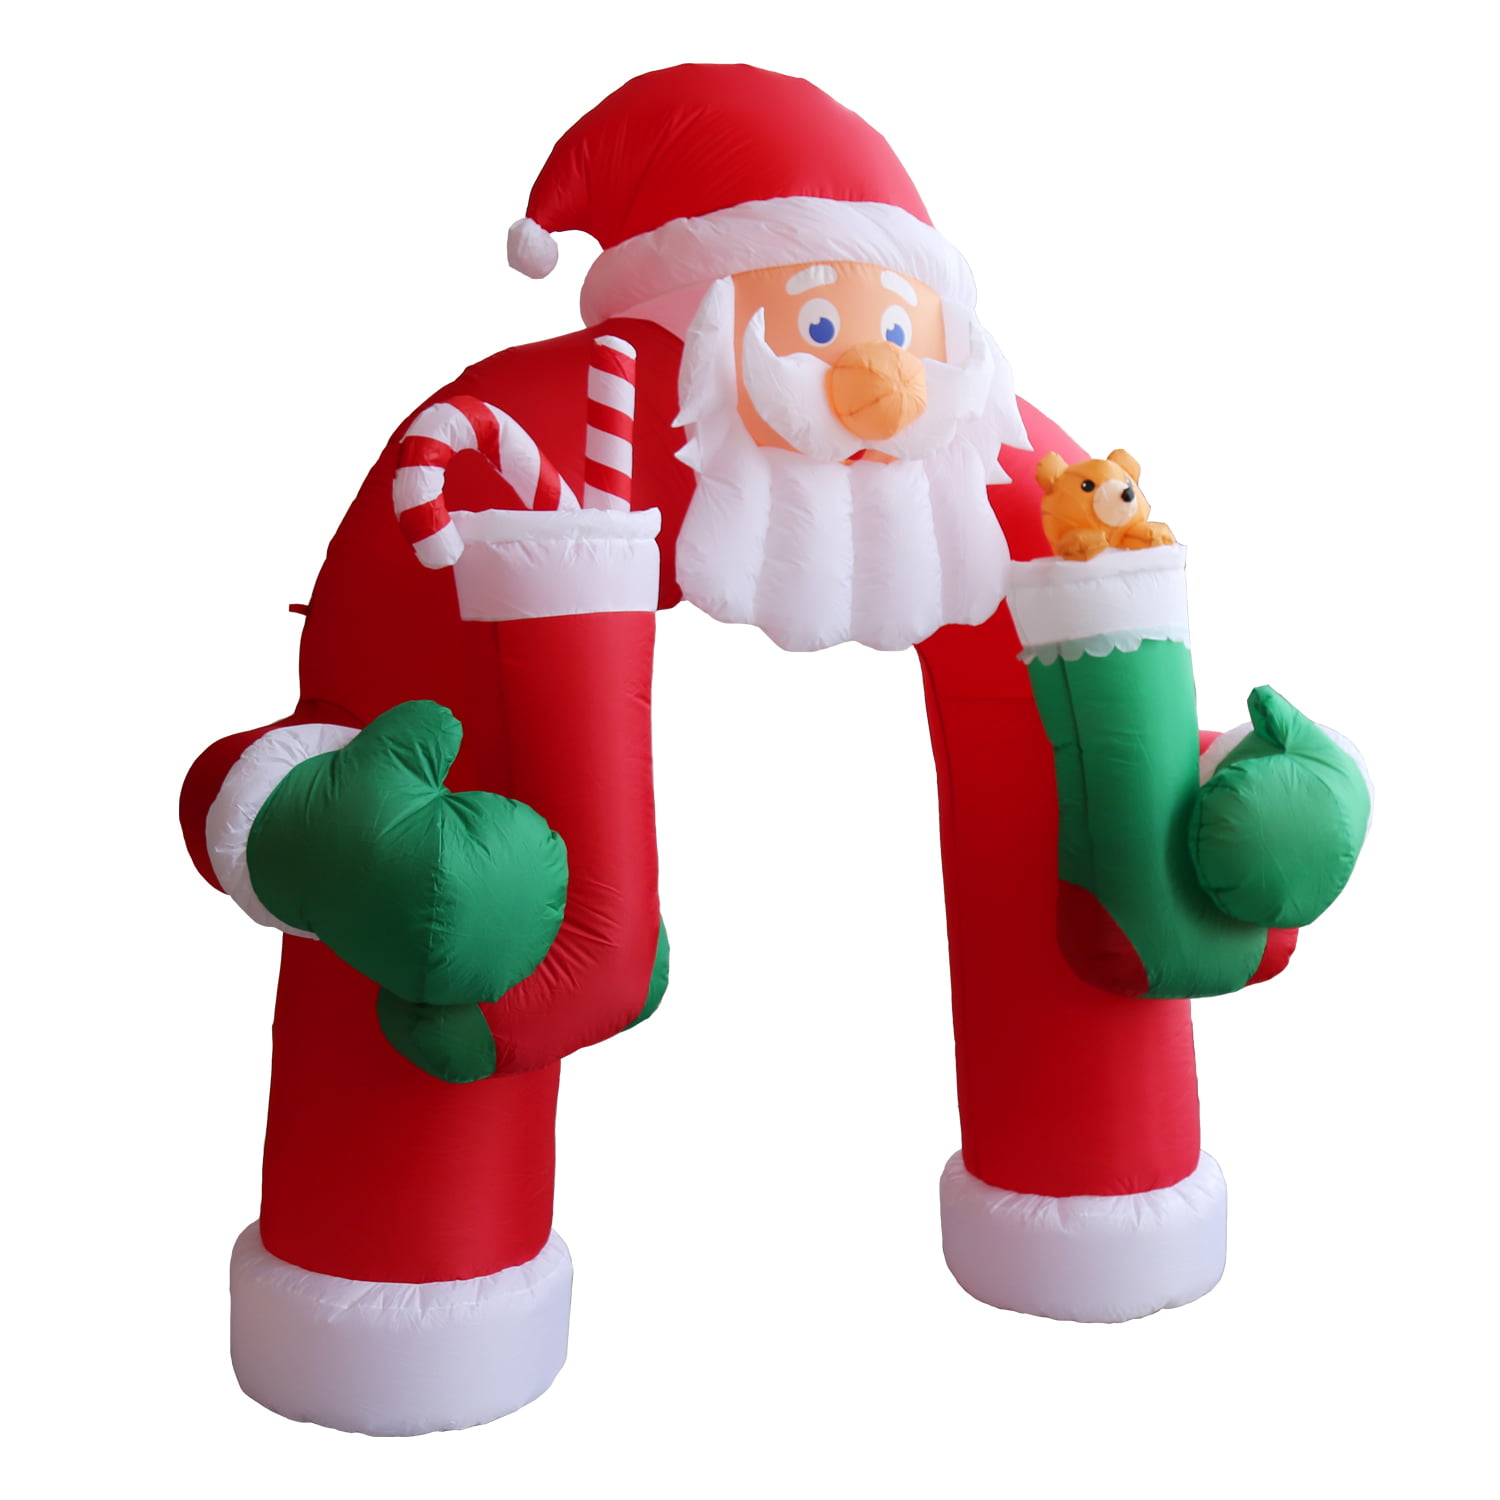 Kintness 11Ft Christmas Inflatable Huge Santa Claus Arch Archway Blown Air Holiday Outdoor Yard Decoration 